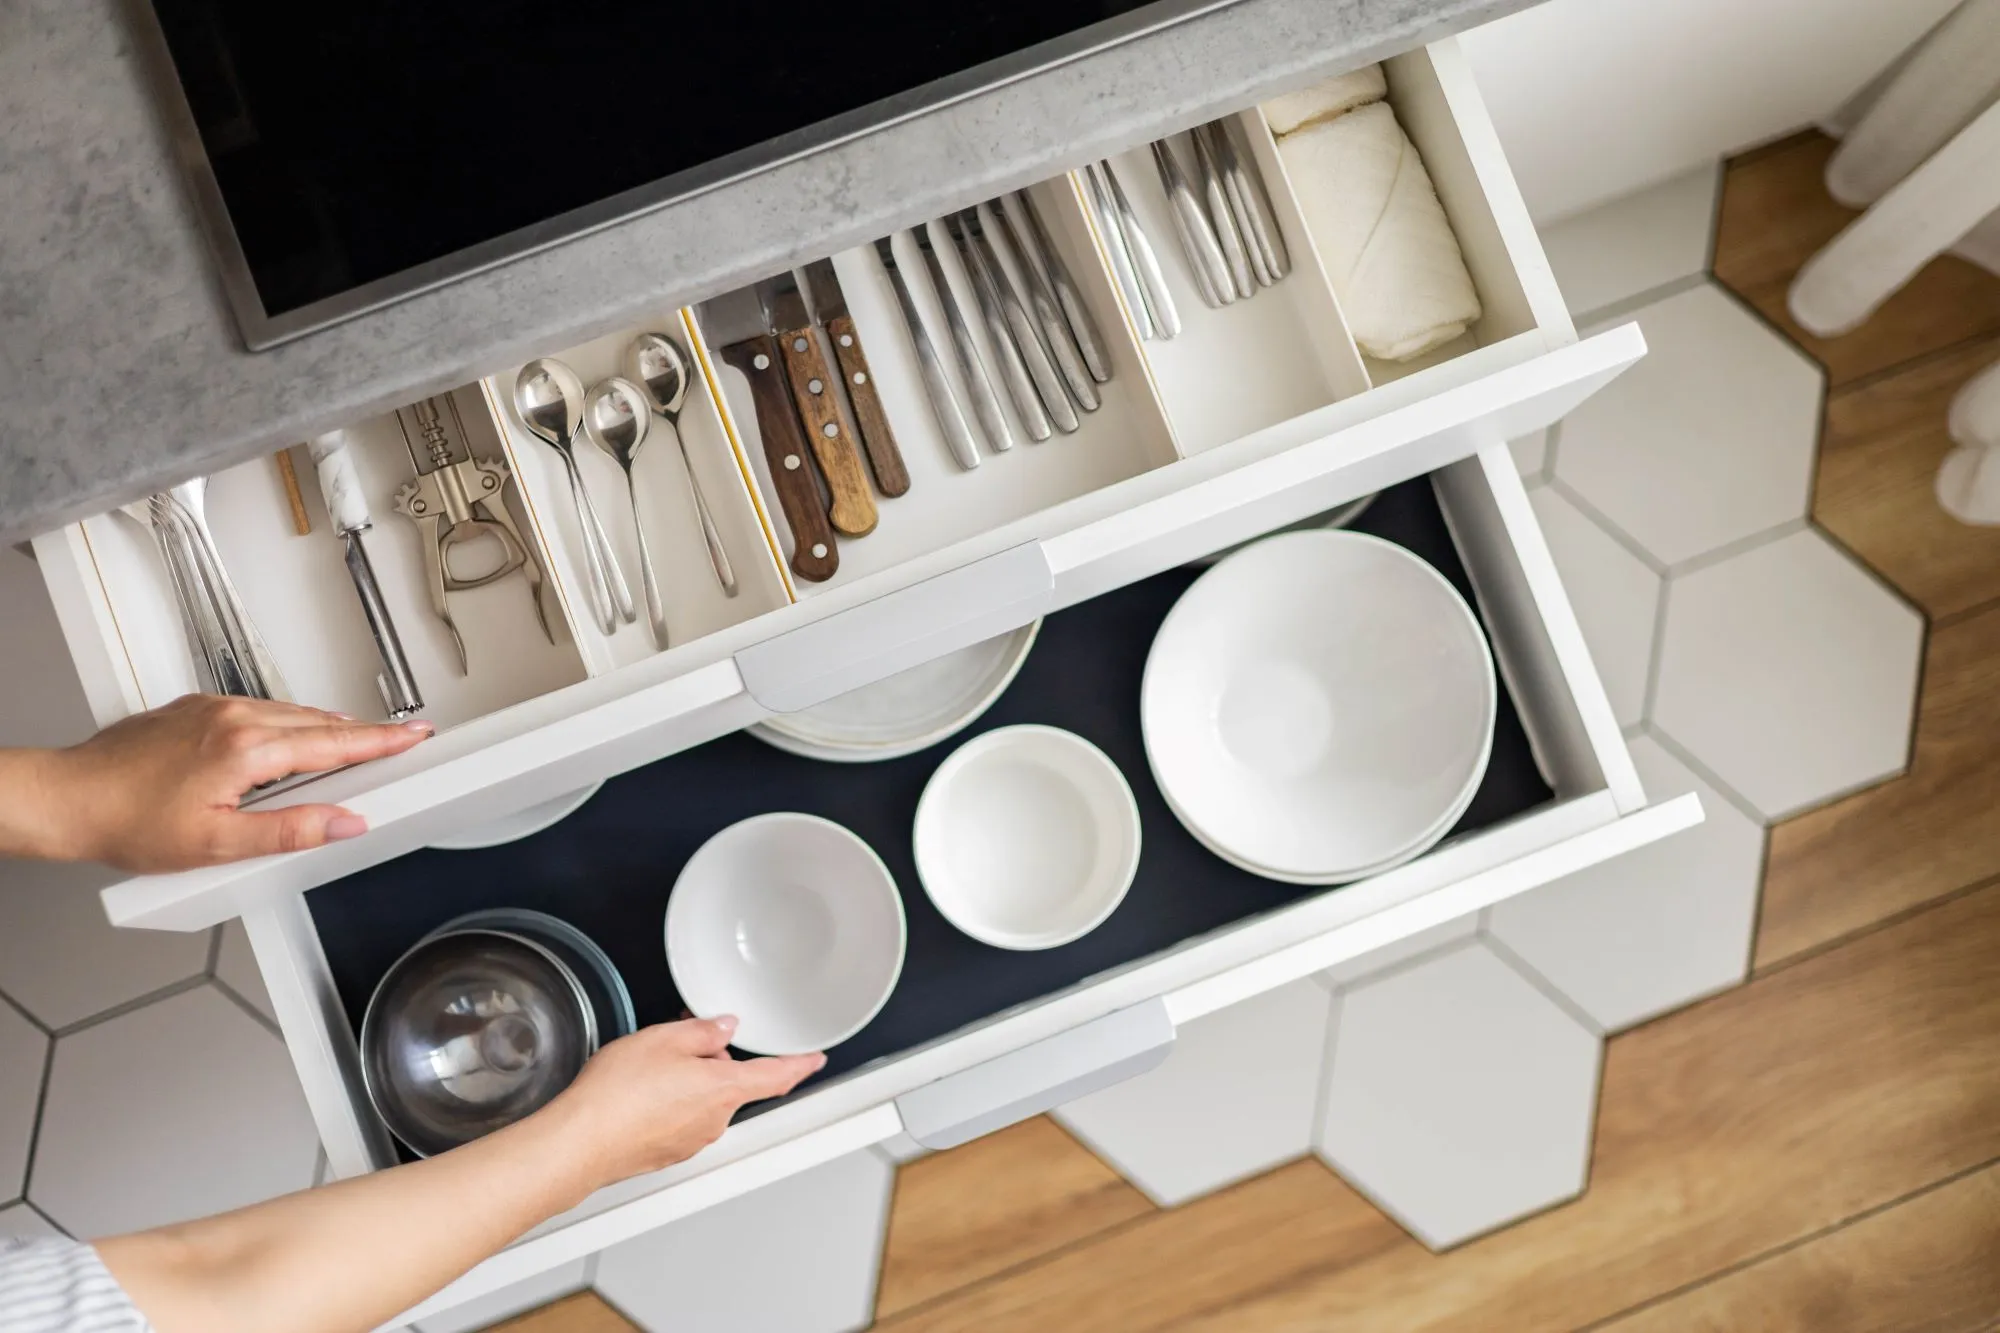 The dividers are the perfect solution for optimal drawer storage space.